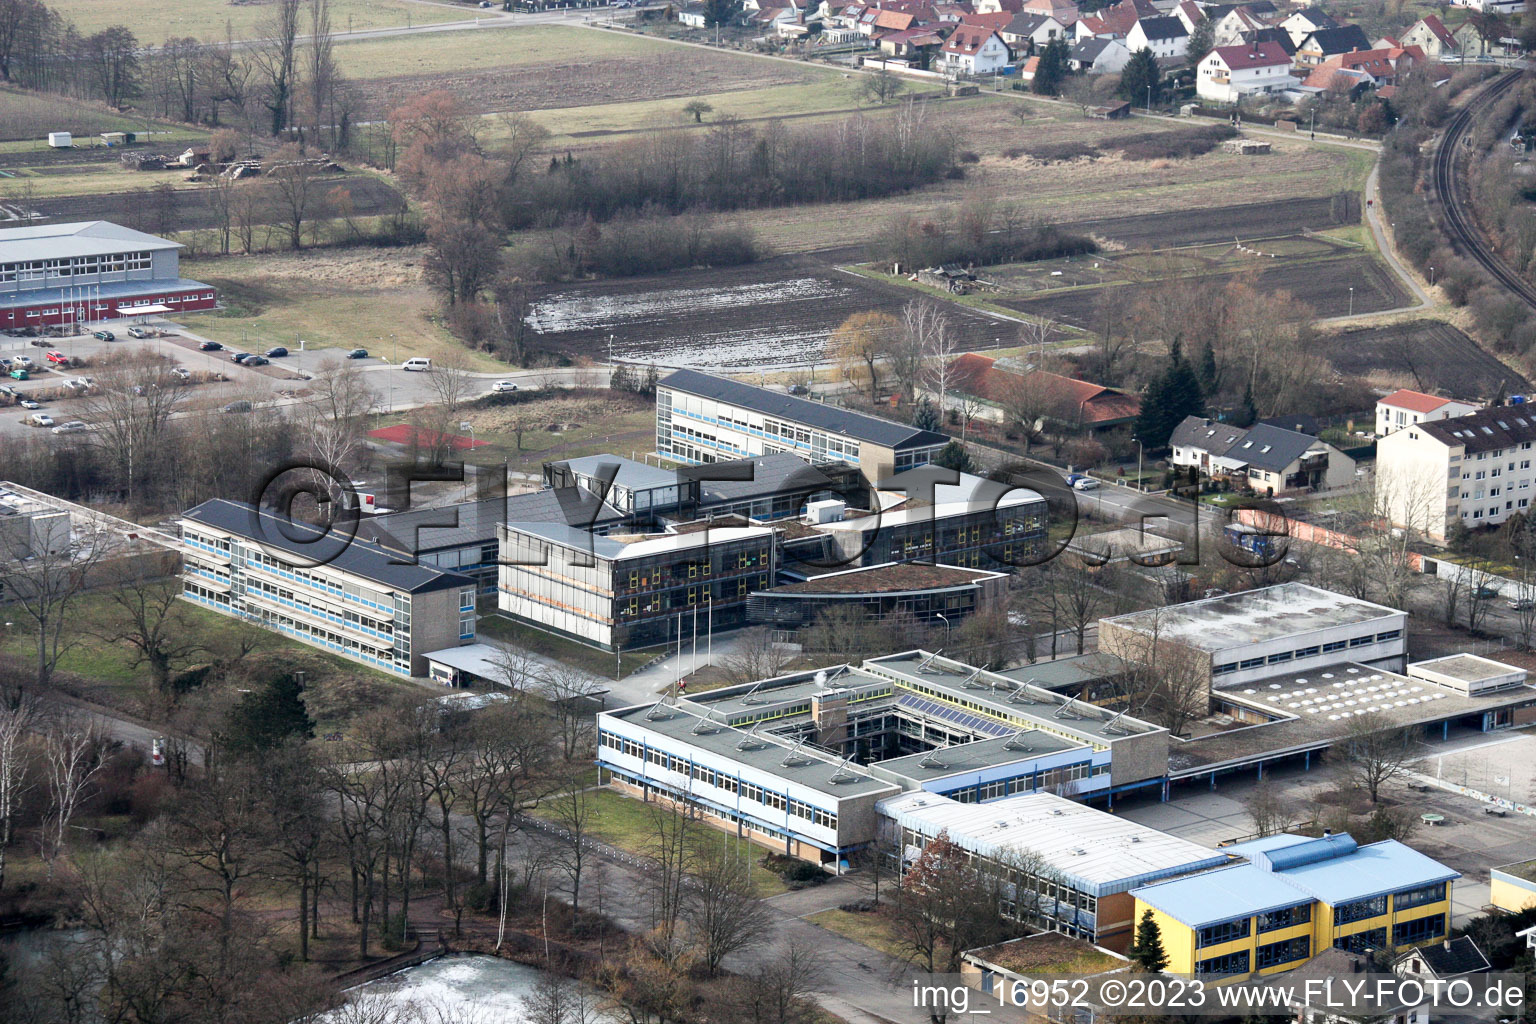 IGS, secondary school in Kandel in the state Rhineland-Palatinate, Germany